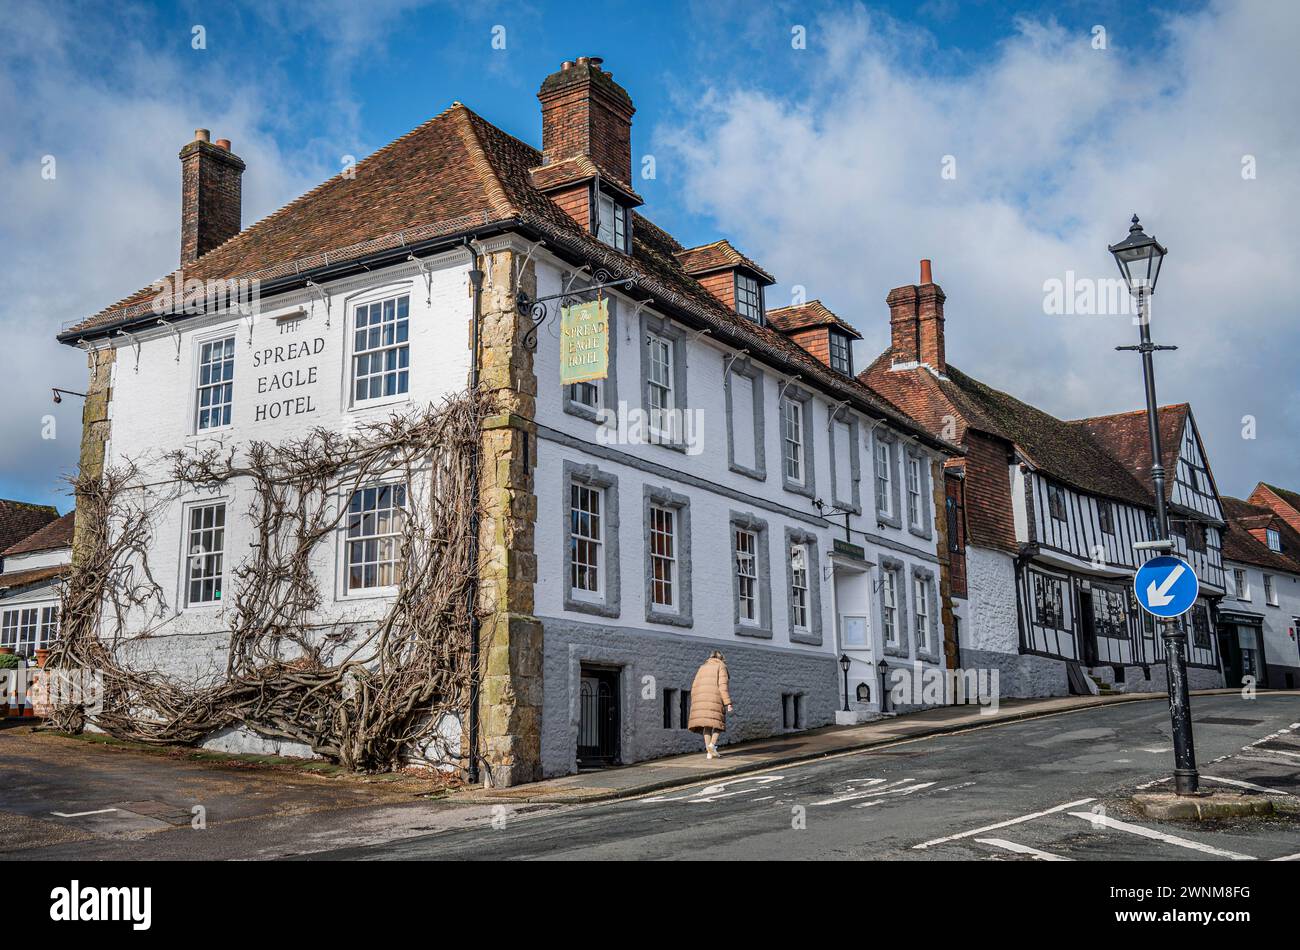 The Spread Eagle an old English public house and hotel in the West Sussex market town of Midhurst . Stock Photo